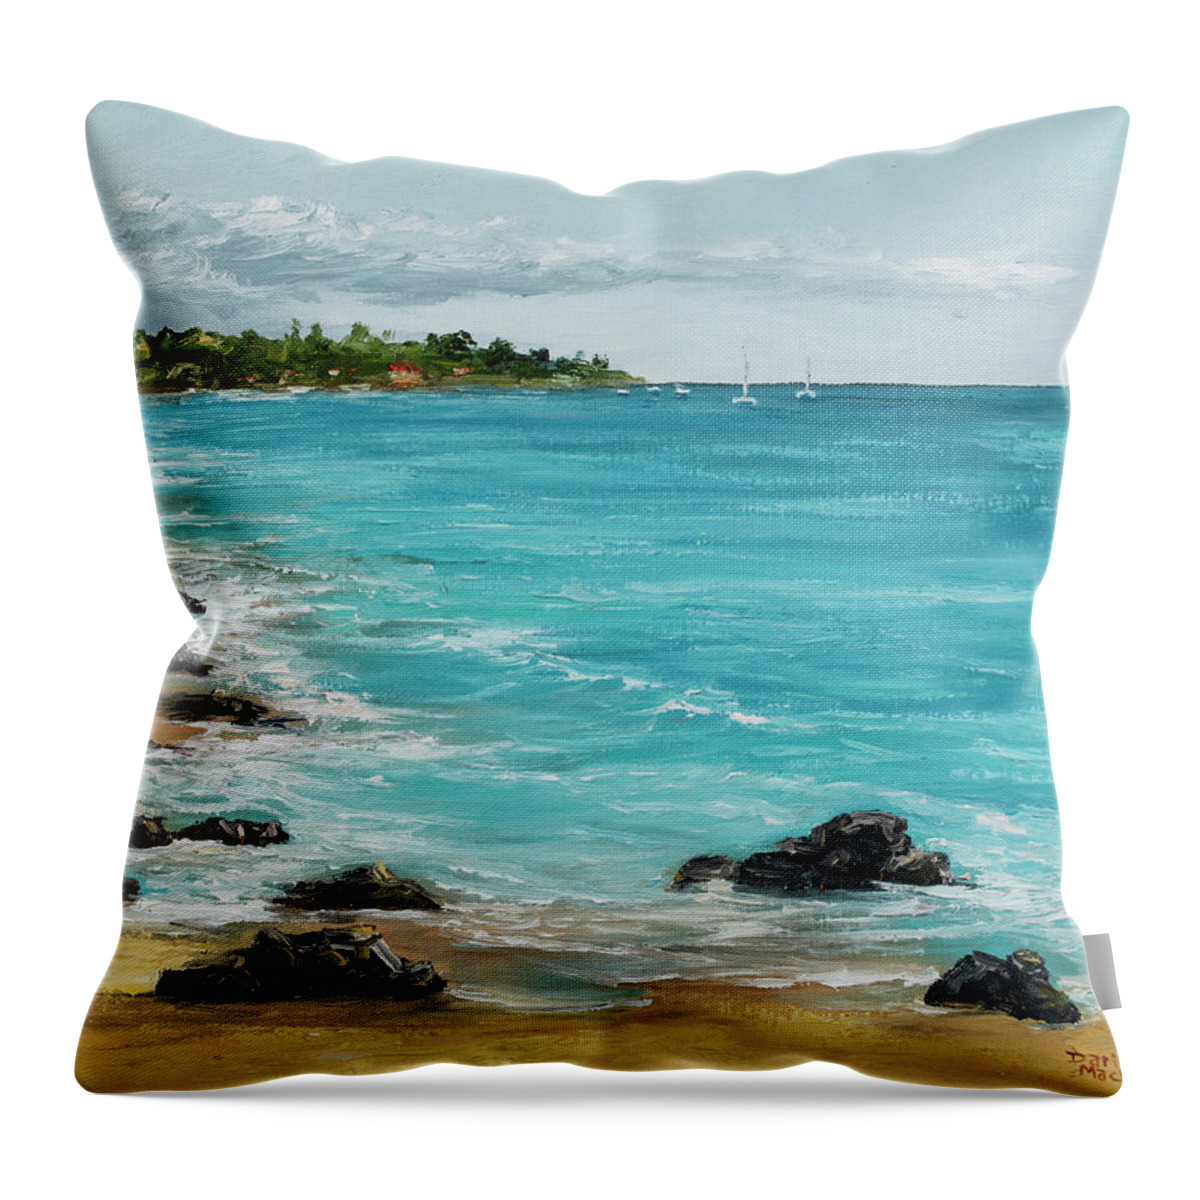 Landscape Throw Pillow featuring the painting Hanakao'o Beach by Darice Machel McGuire